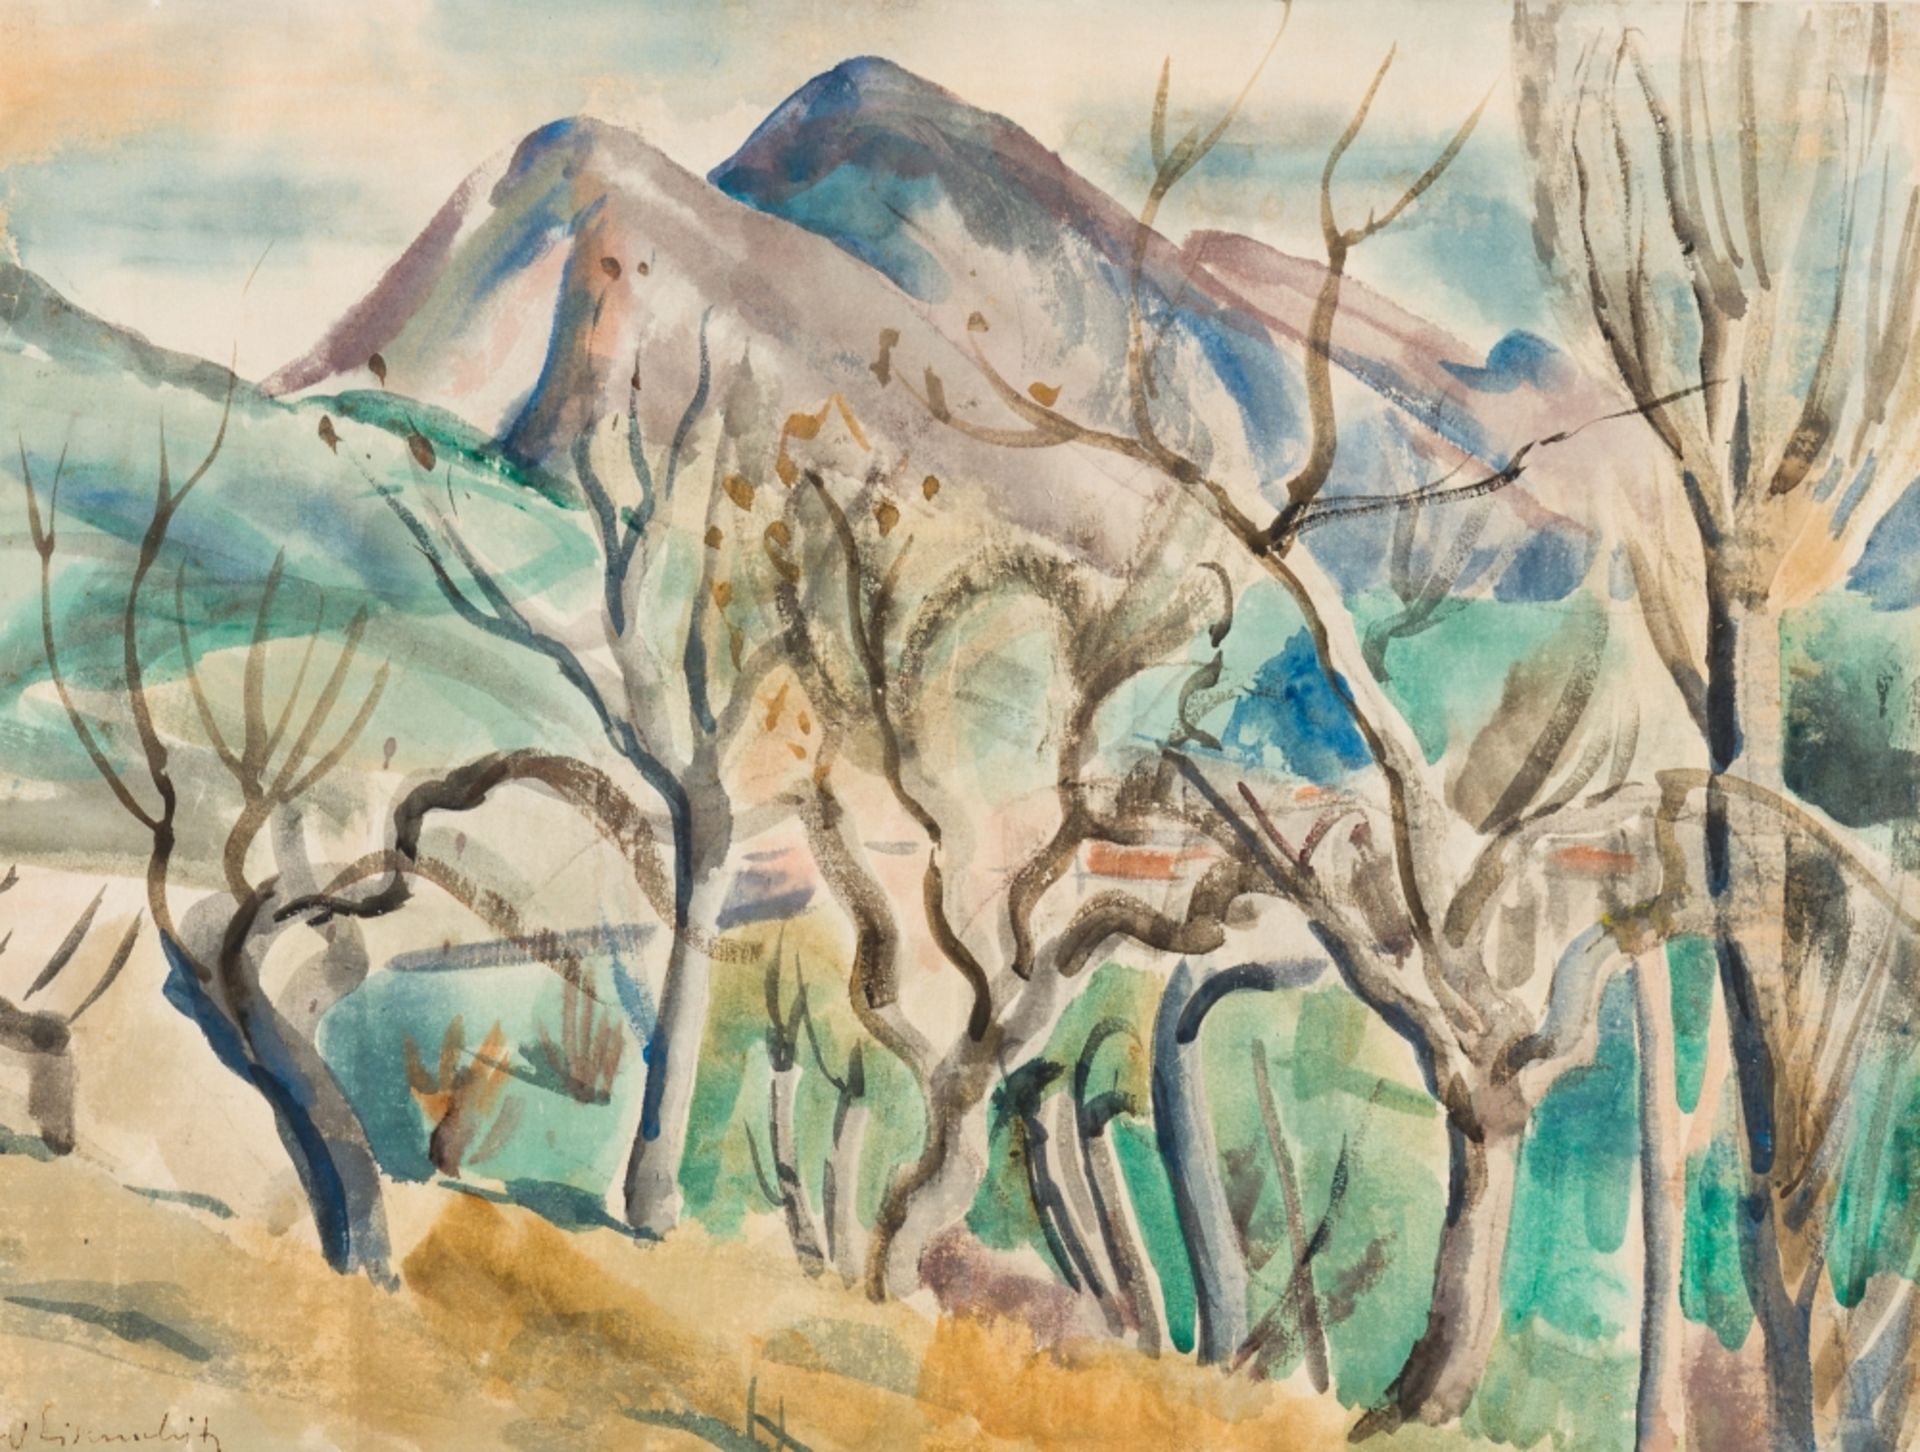 Eisenschitz, Willy(1889 - 1974)Haute Provence, 1930Watercolor on PaperSigned lower